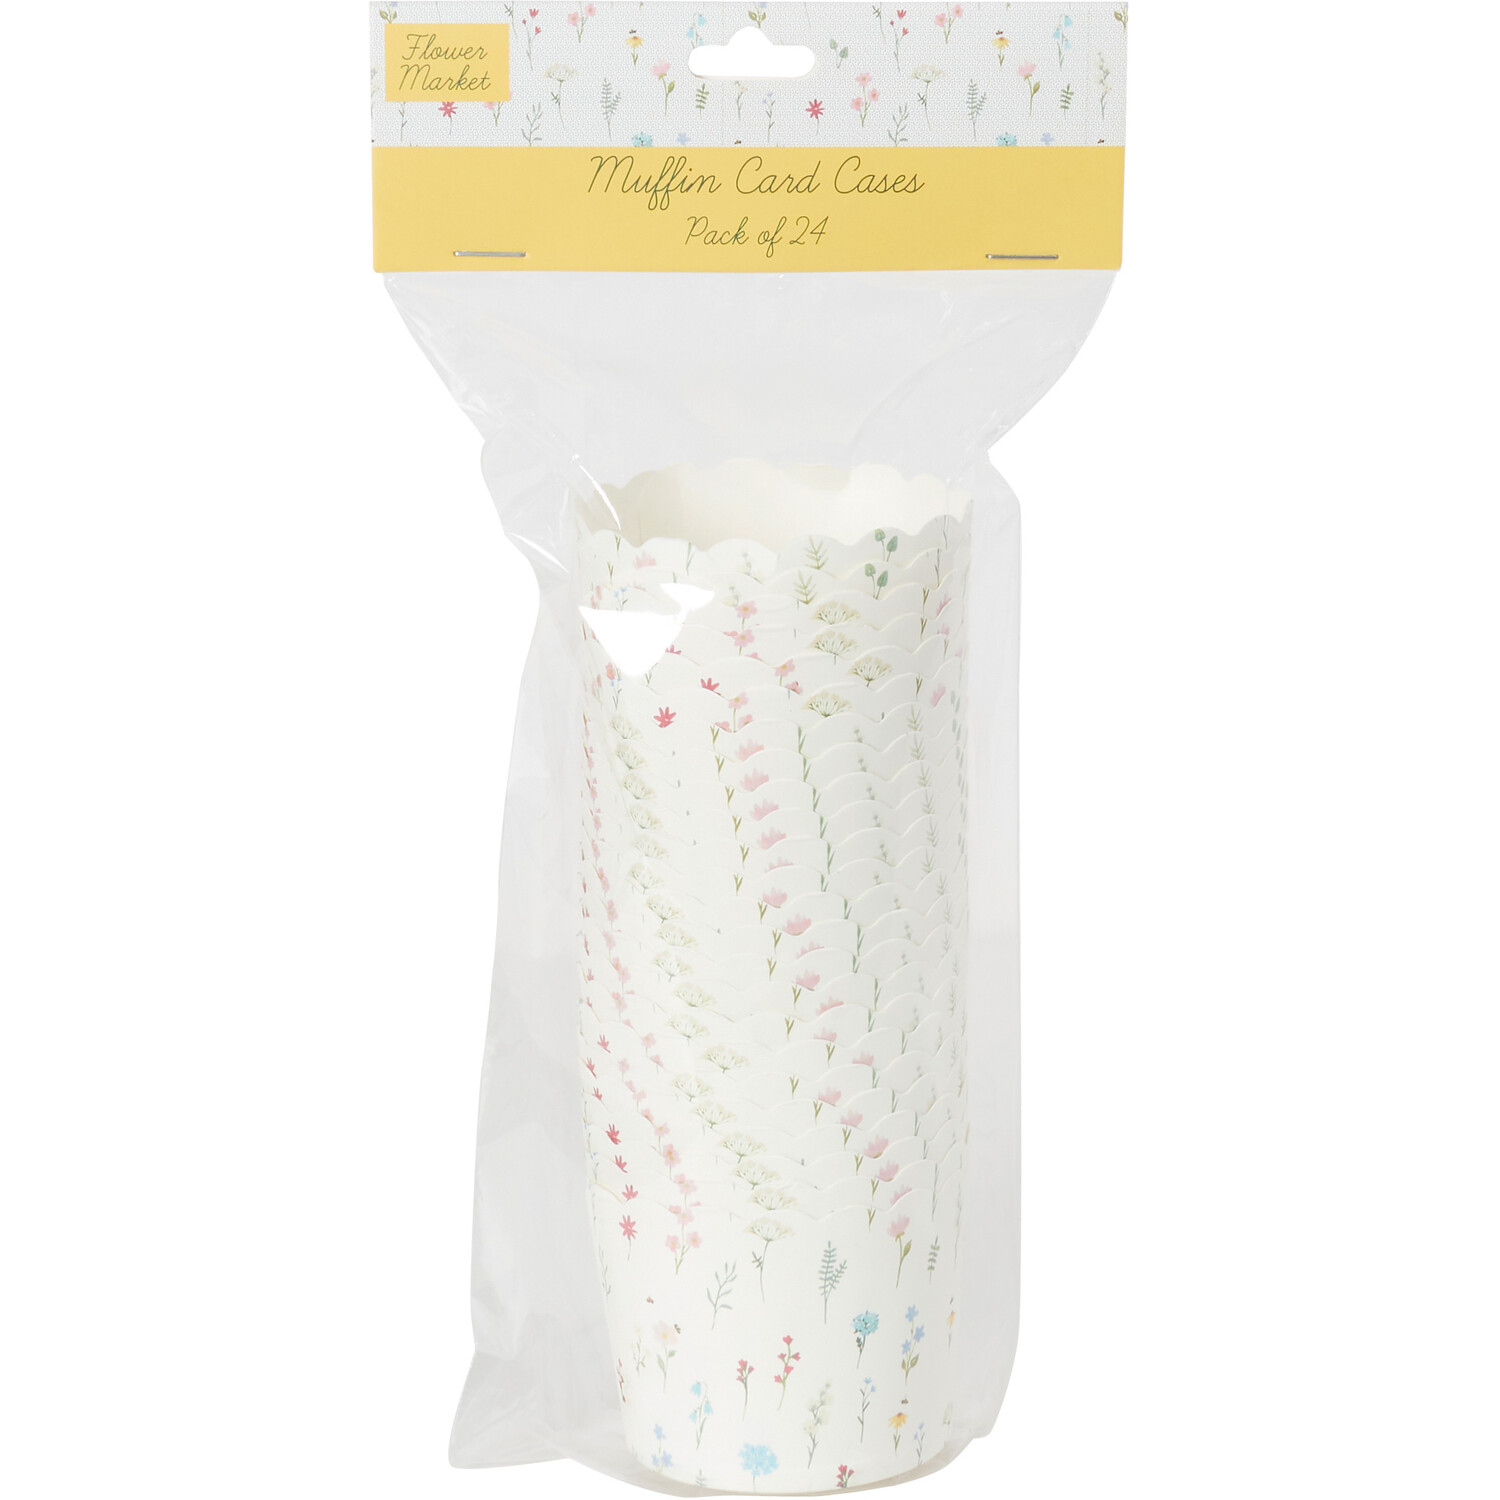 Pack of 24 Flower Market Muffin Cases - White Image 1